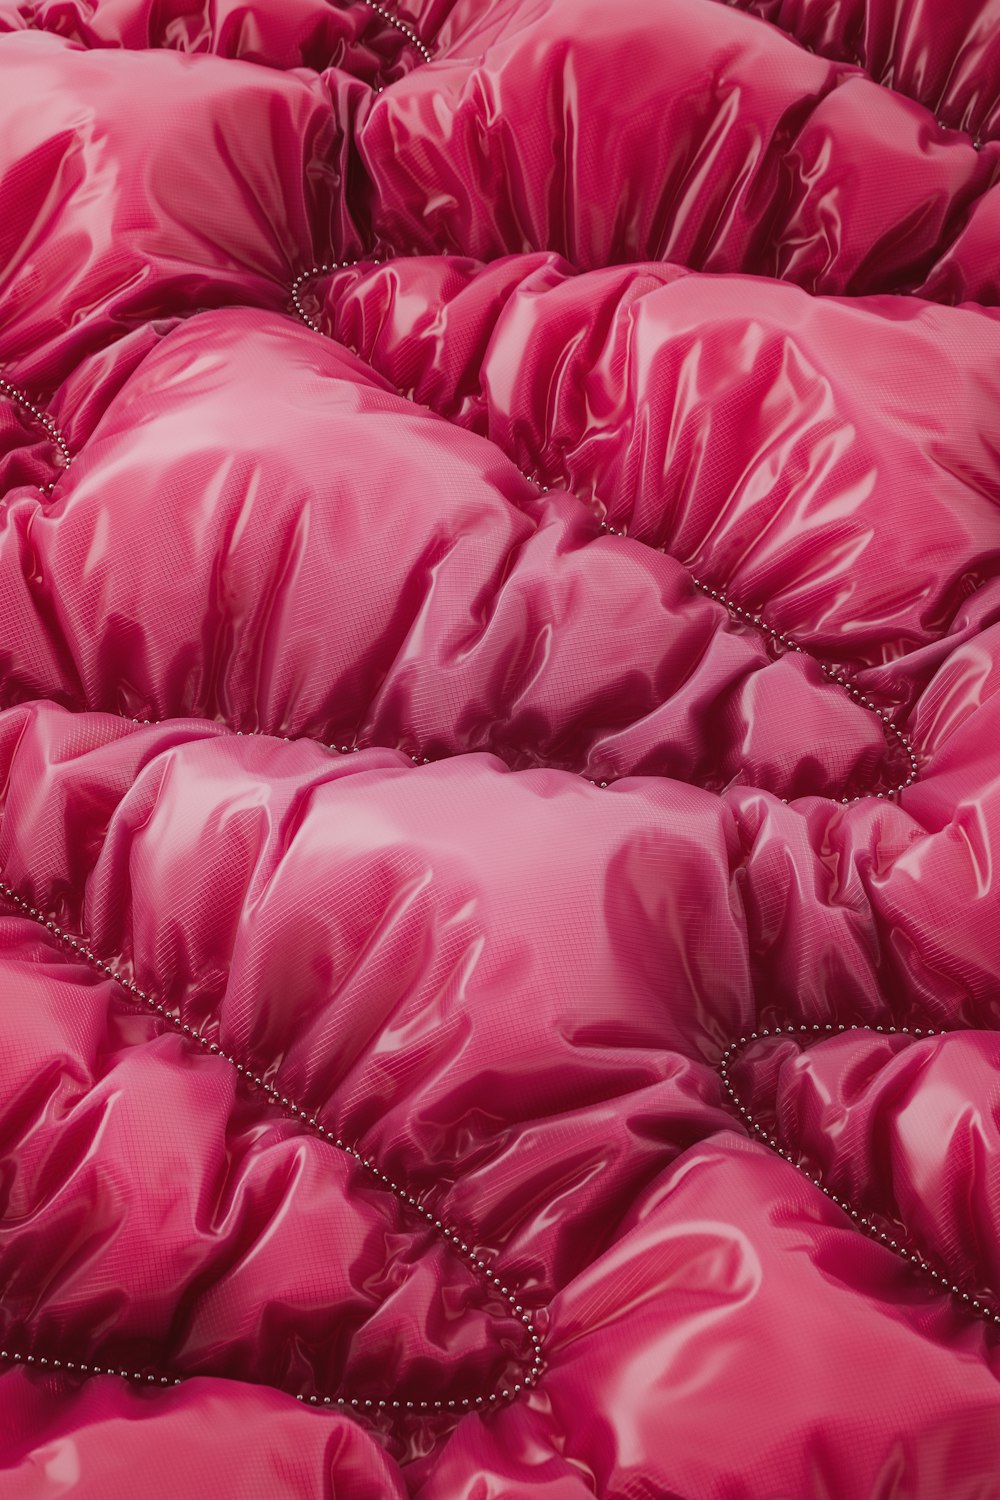 a close up of a pink comforter on a bed